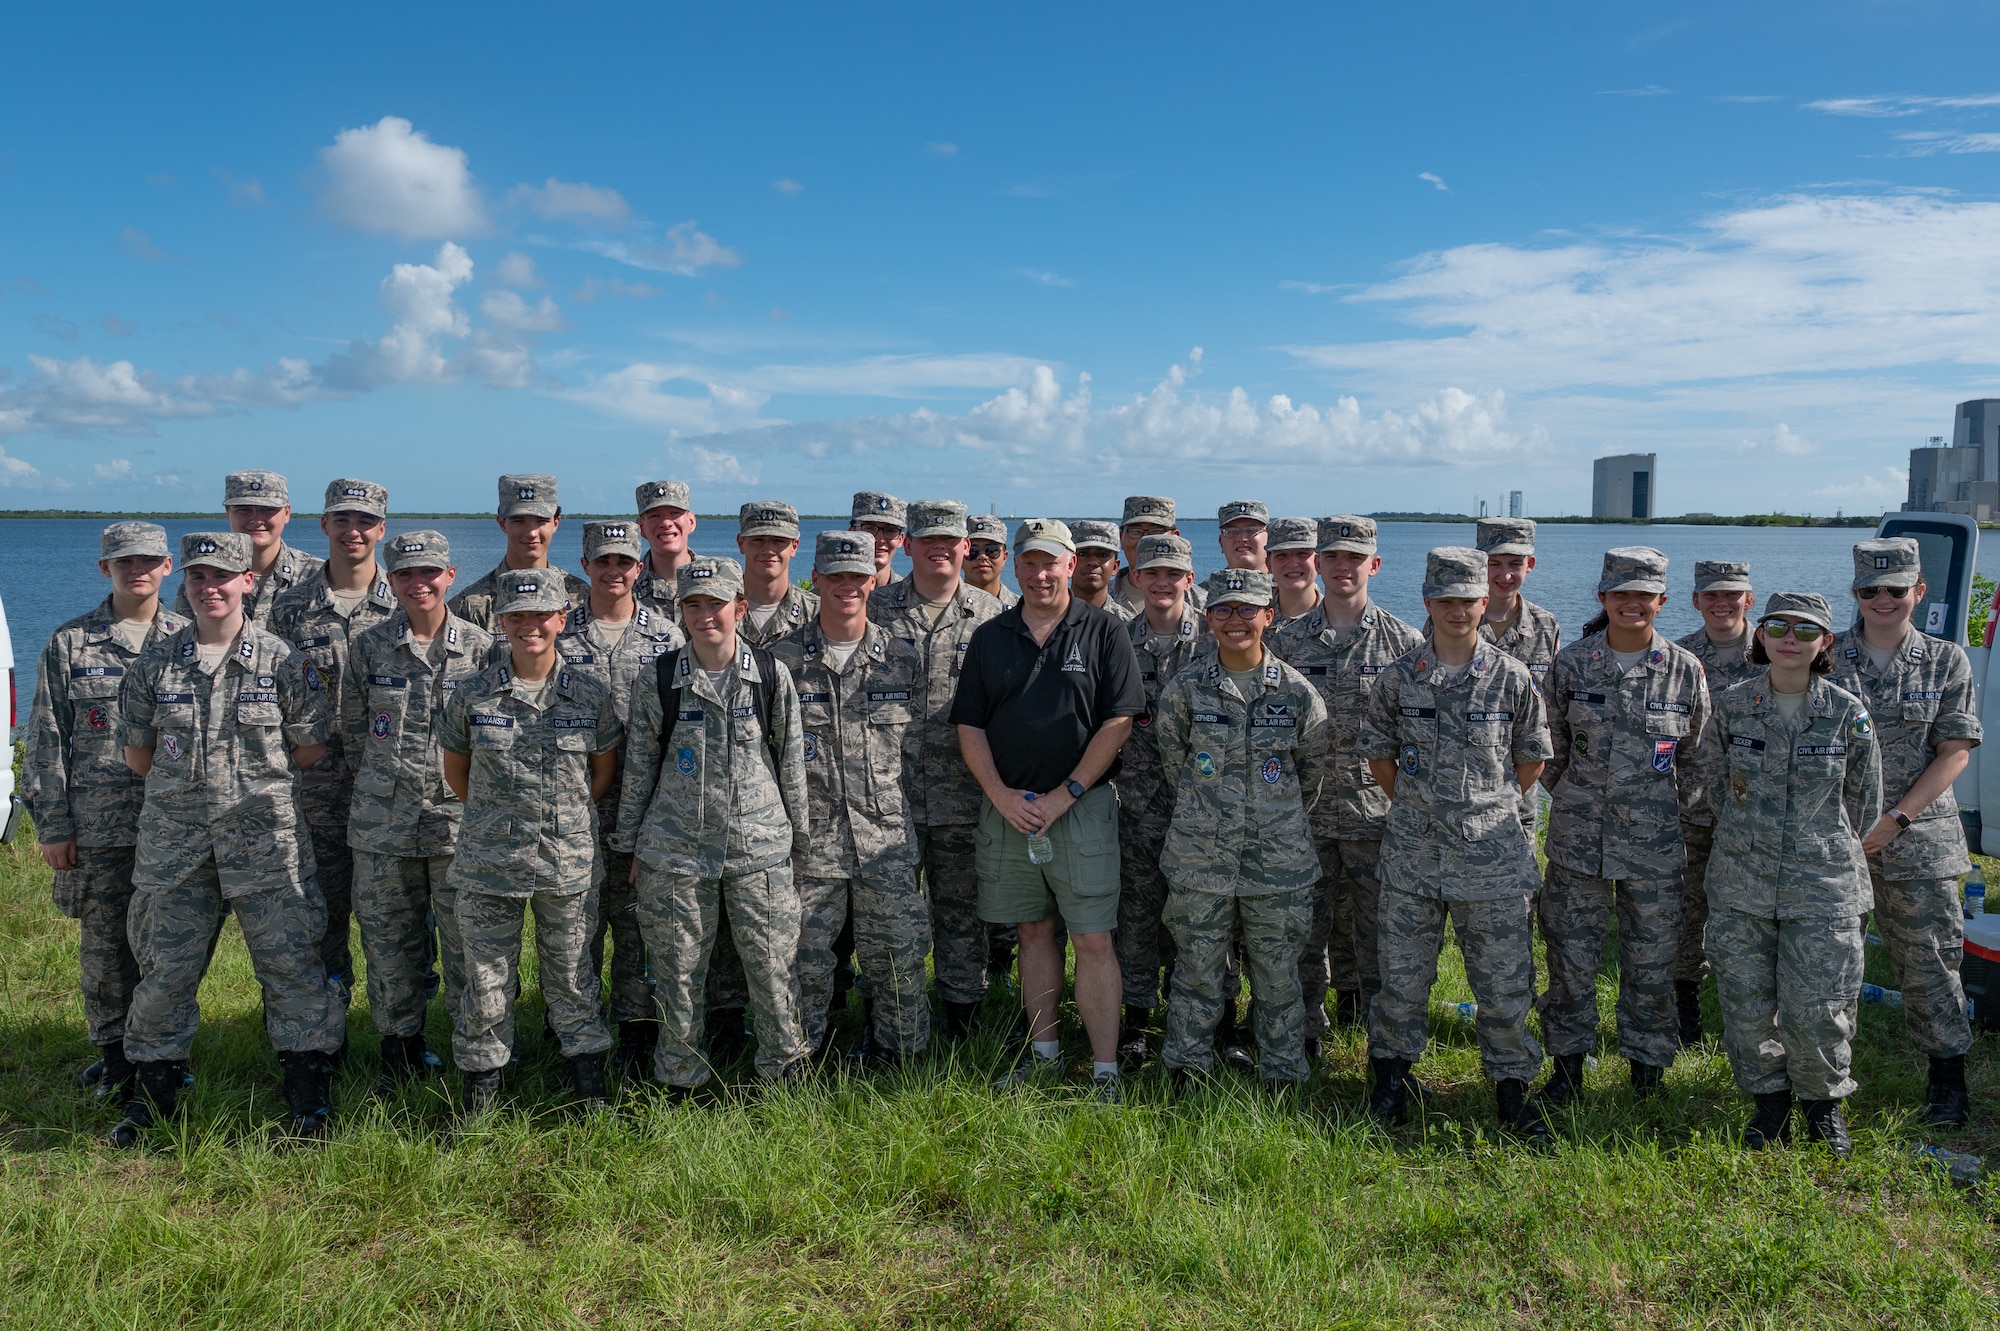 U.S. Space Force Brig. Gen. Stephan Purdy, Space Launch Delta 45 commander, and cadets with the Civil Air Patrol Space Force Operations Academy pose for a group photo, July 24, 2022 at Cape Canaveral Space Force Station, Fla. The group of cadets toured sites at Cape Canaveral SFS, Kennedy Space Center, and Patrick Space Force Base, Fla. (U.S. Space Force photo by Senior Airman Dakota Raub